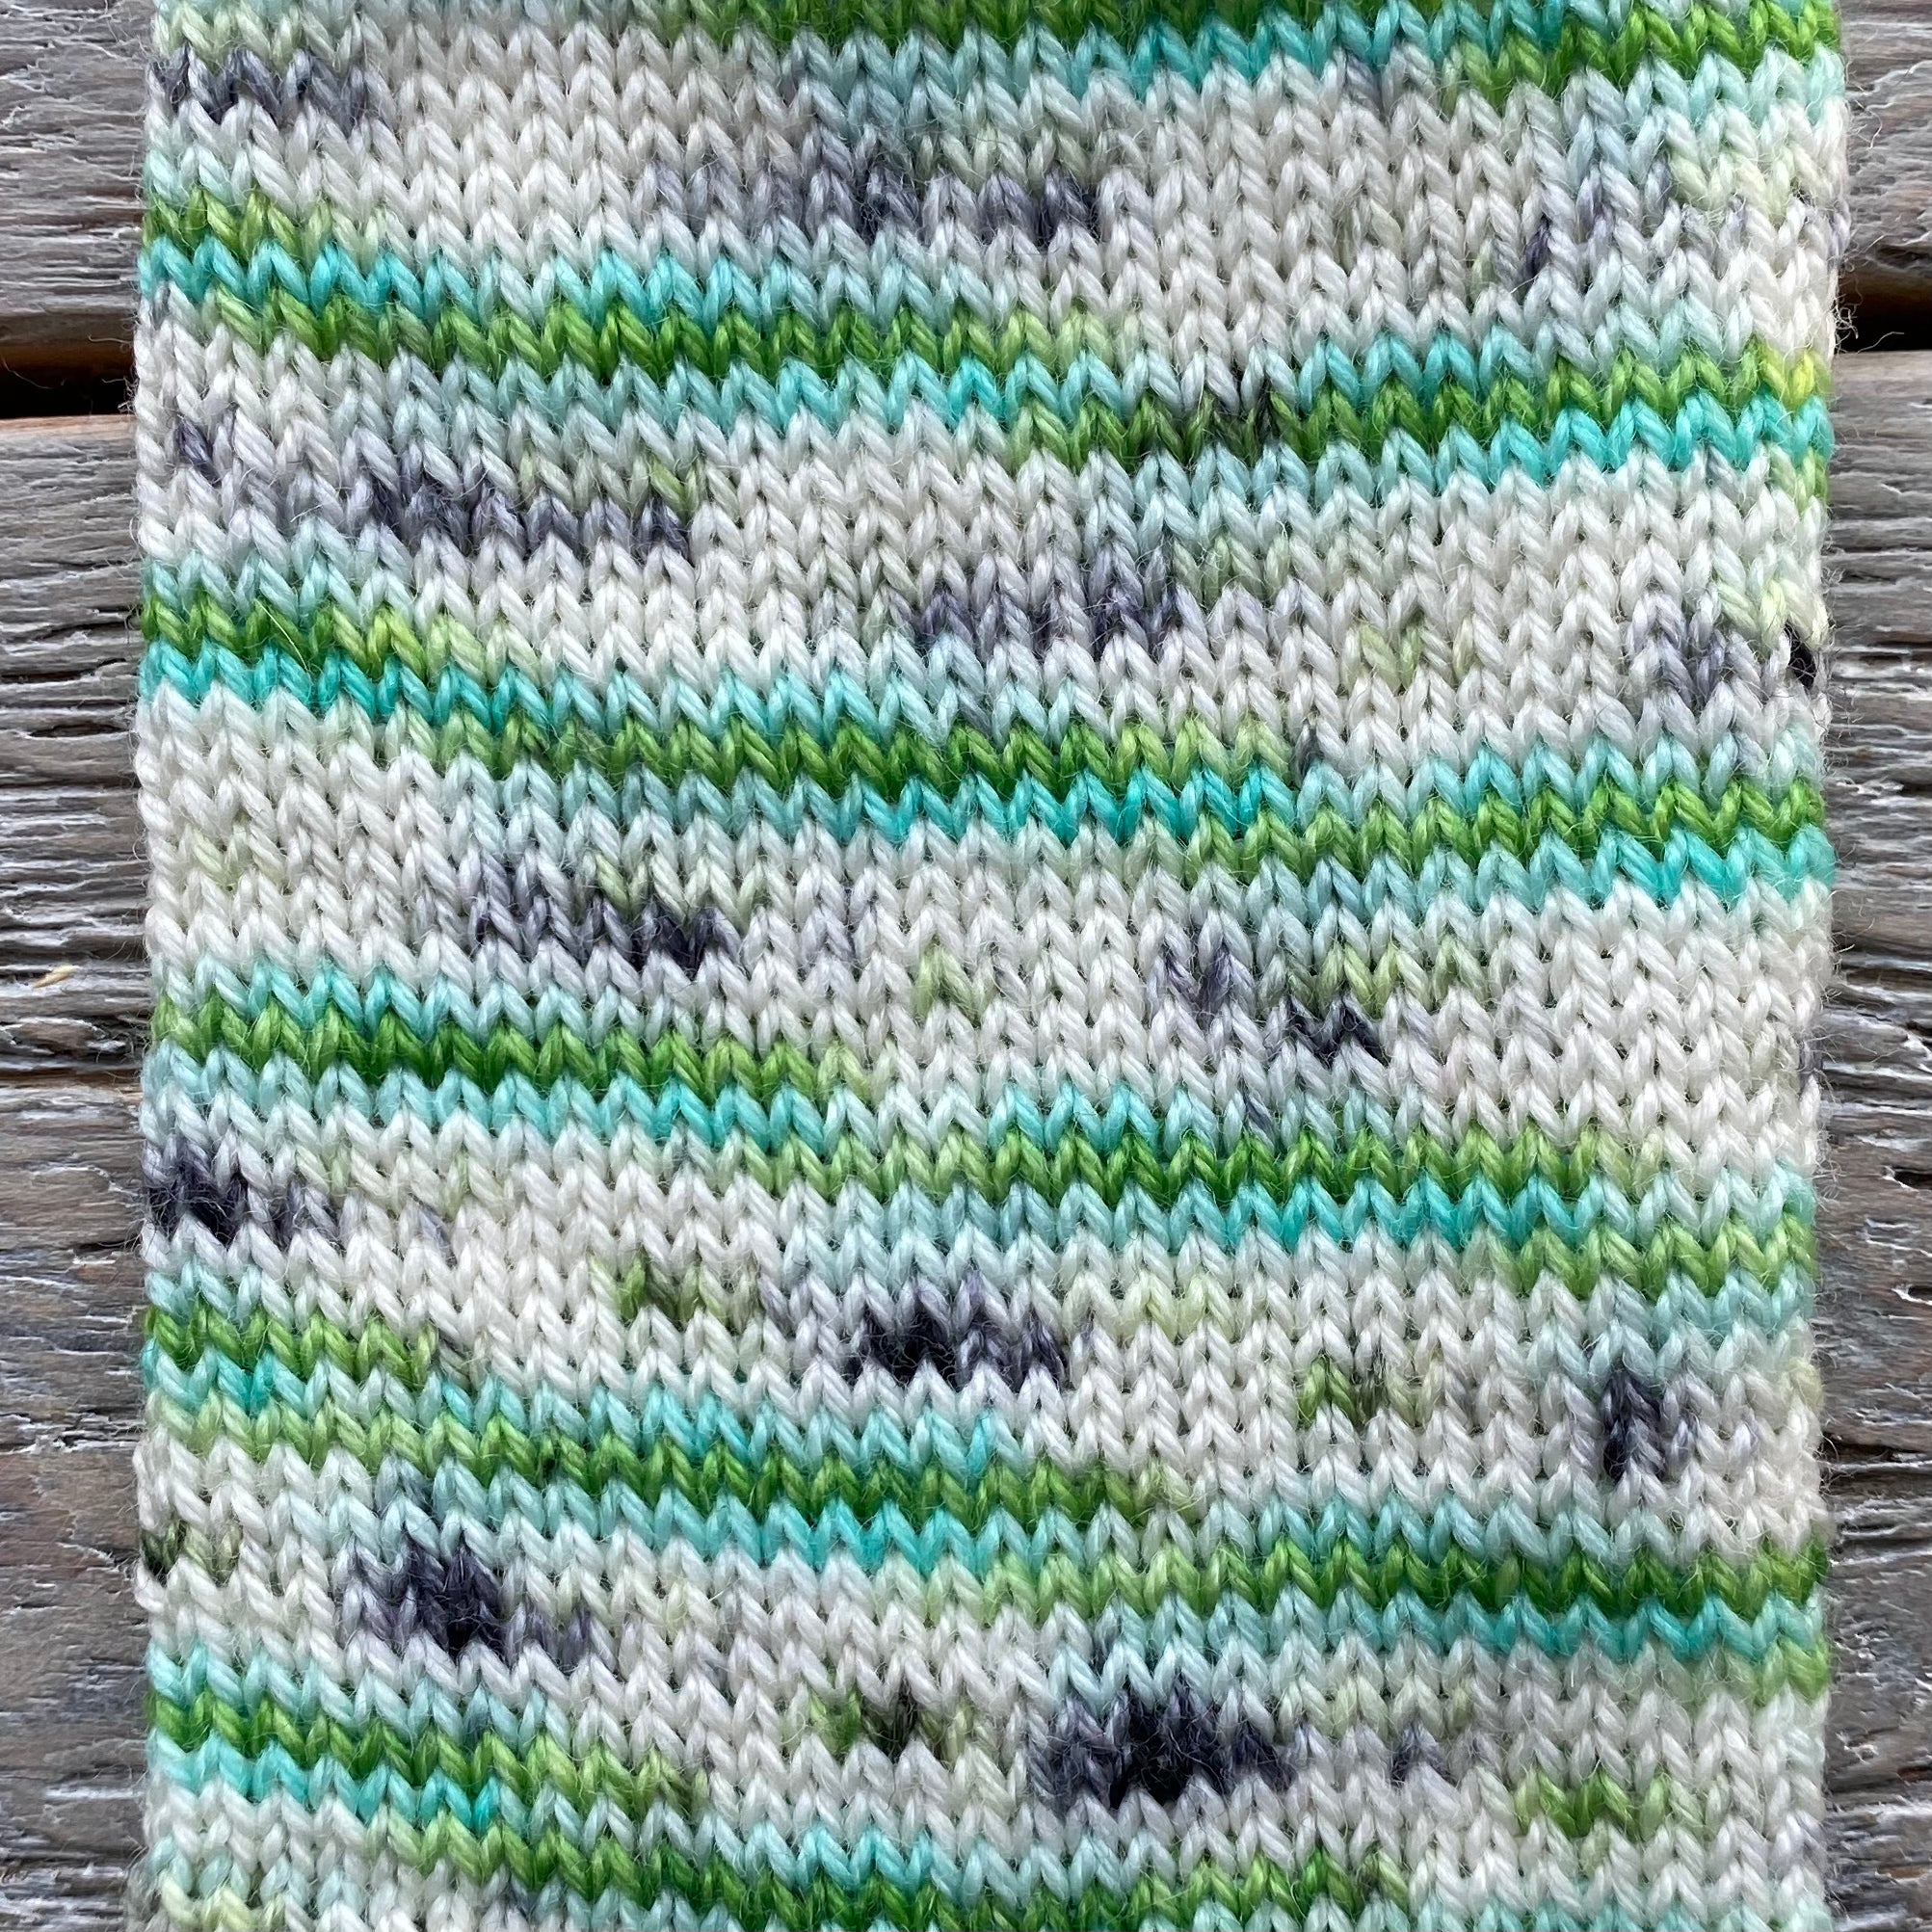 Broken Rainbow On Basic Sock Green and Blue - Body Changes are Normal